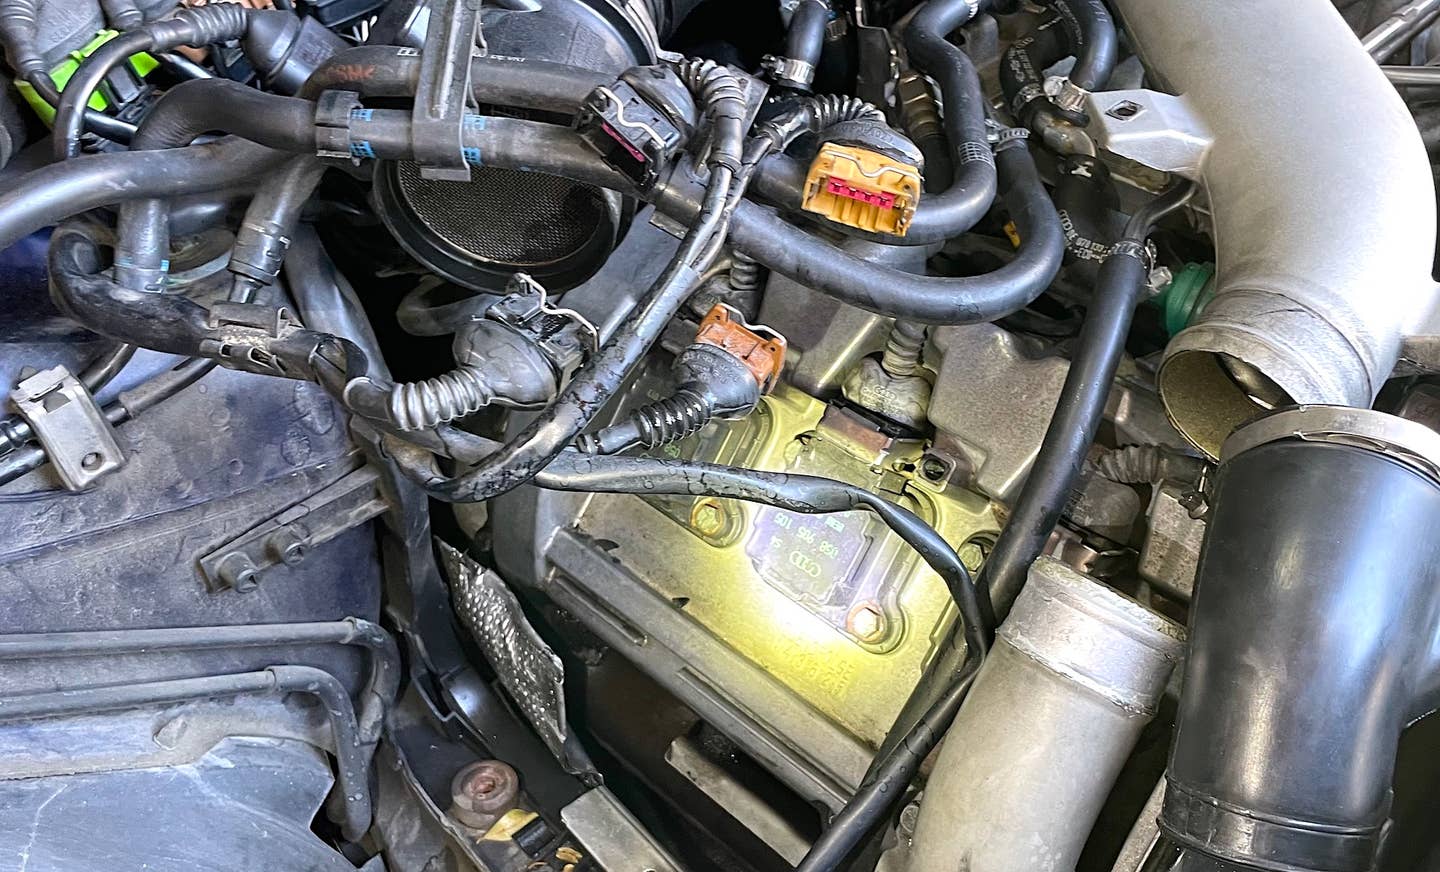 Here's how to change spark plugs